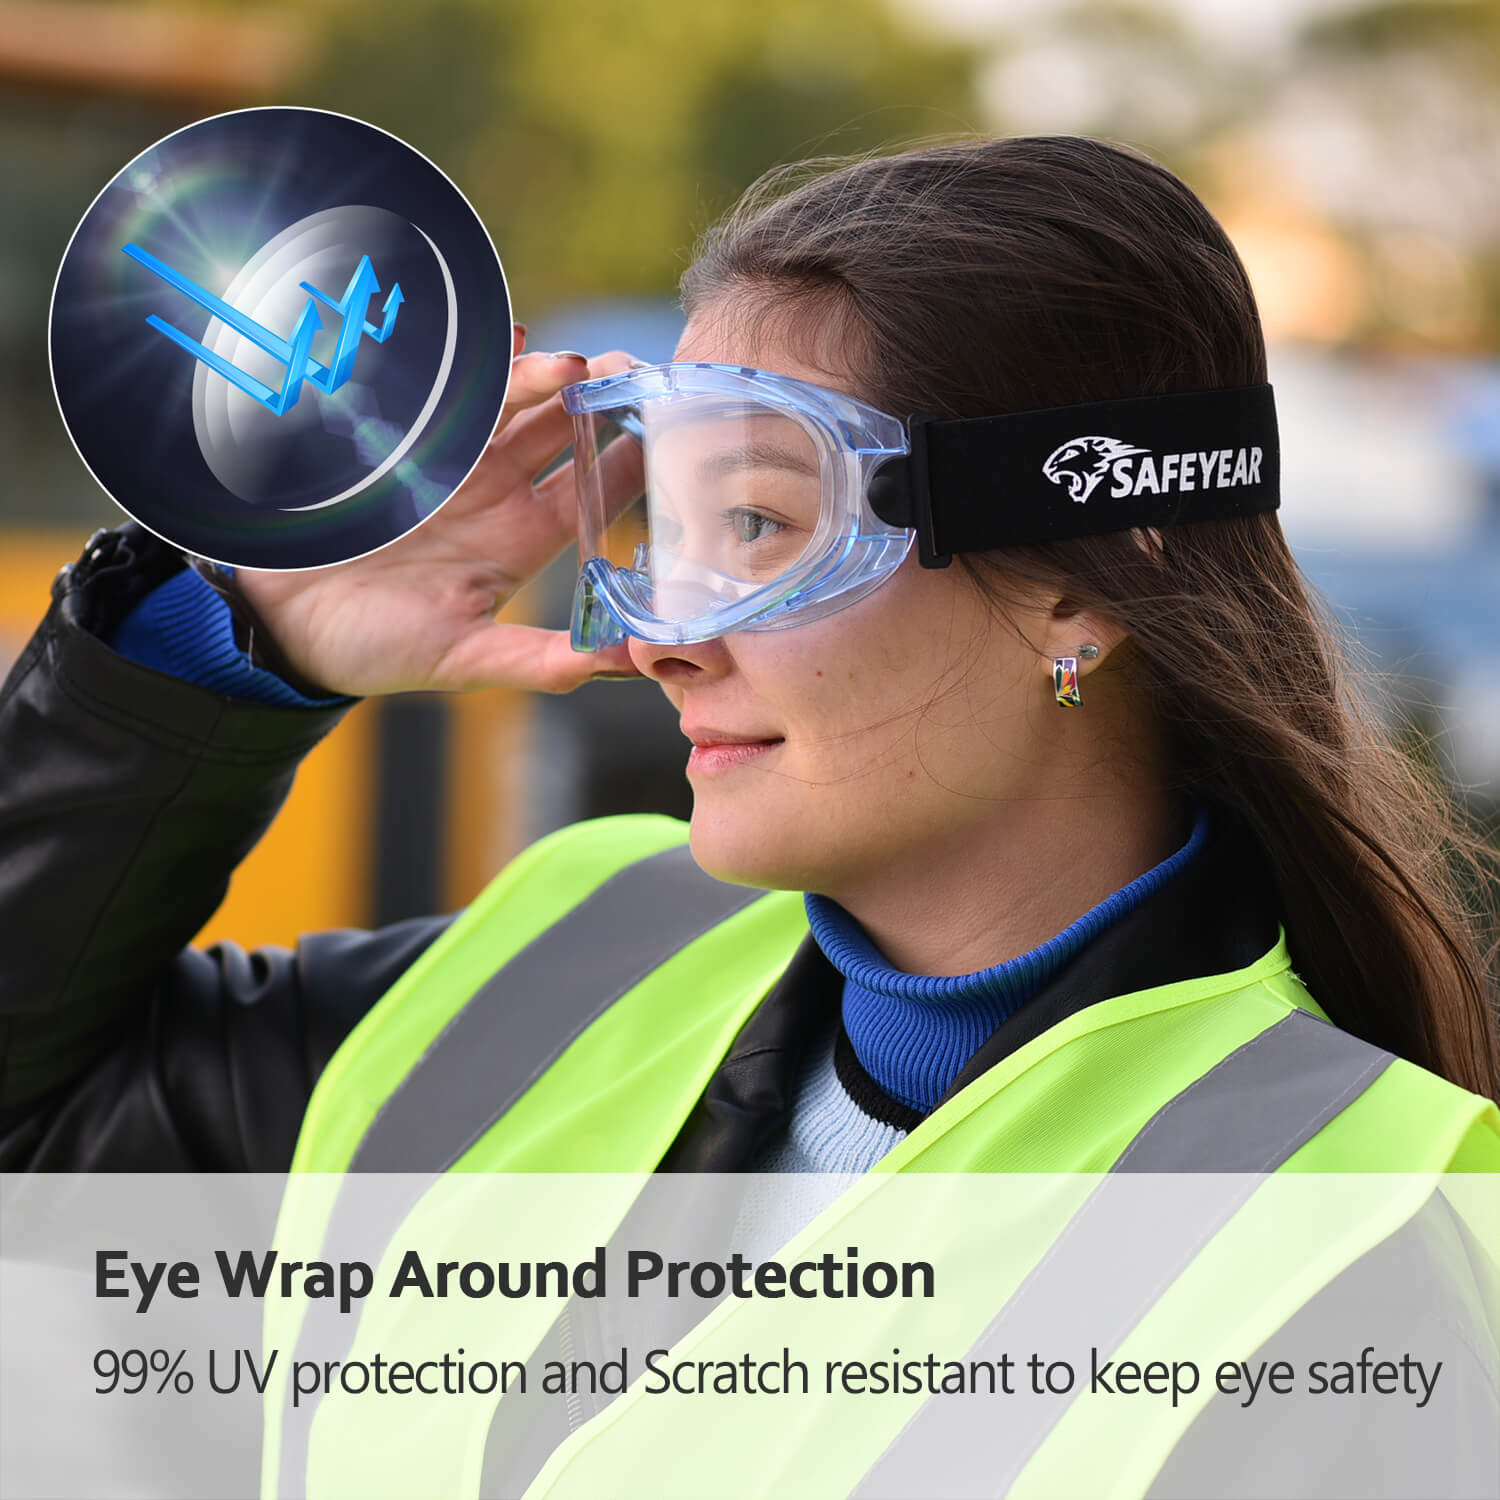 Safeyear Anti Scratch & Over-Glasses Safety Work Goggles